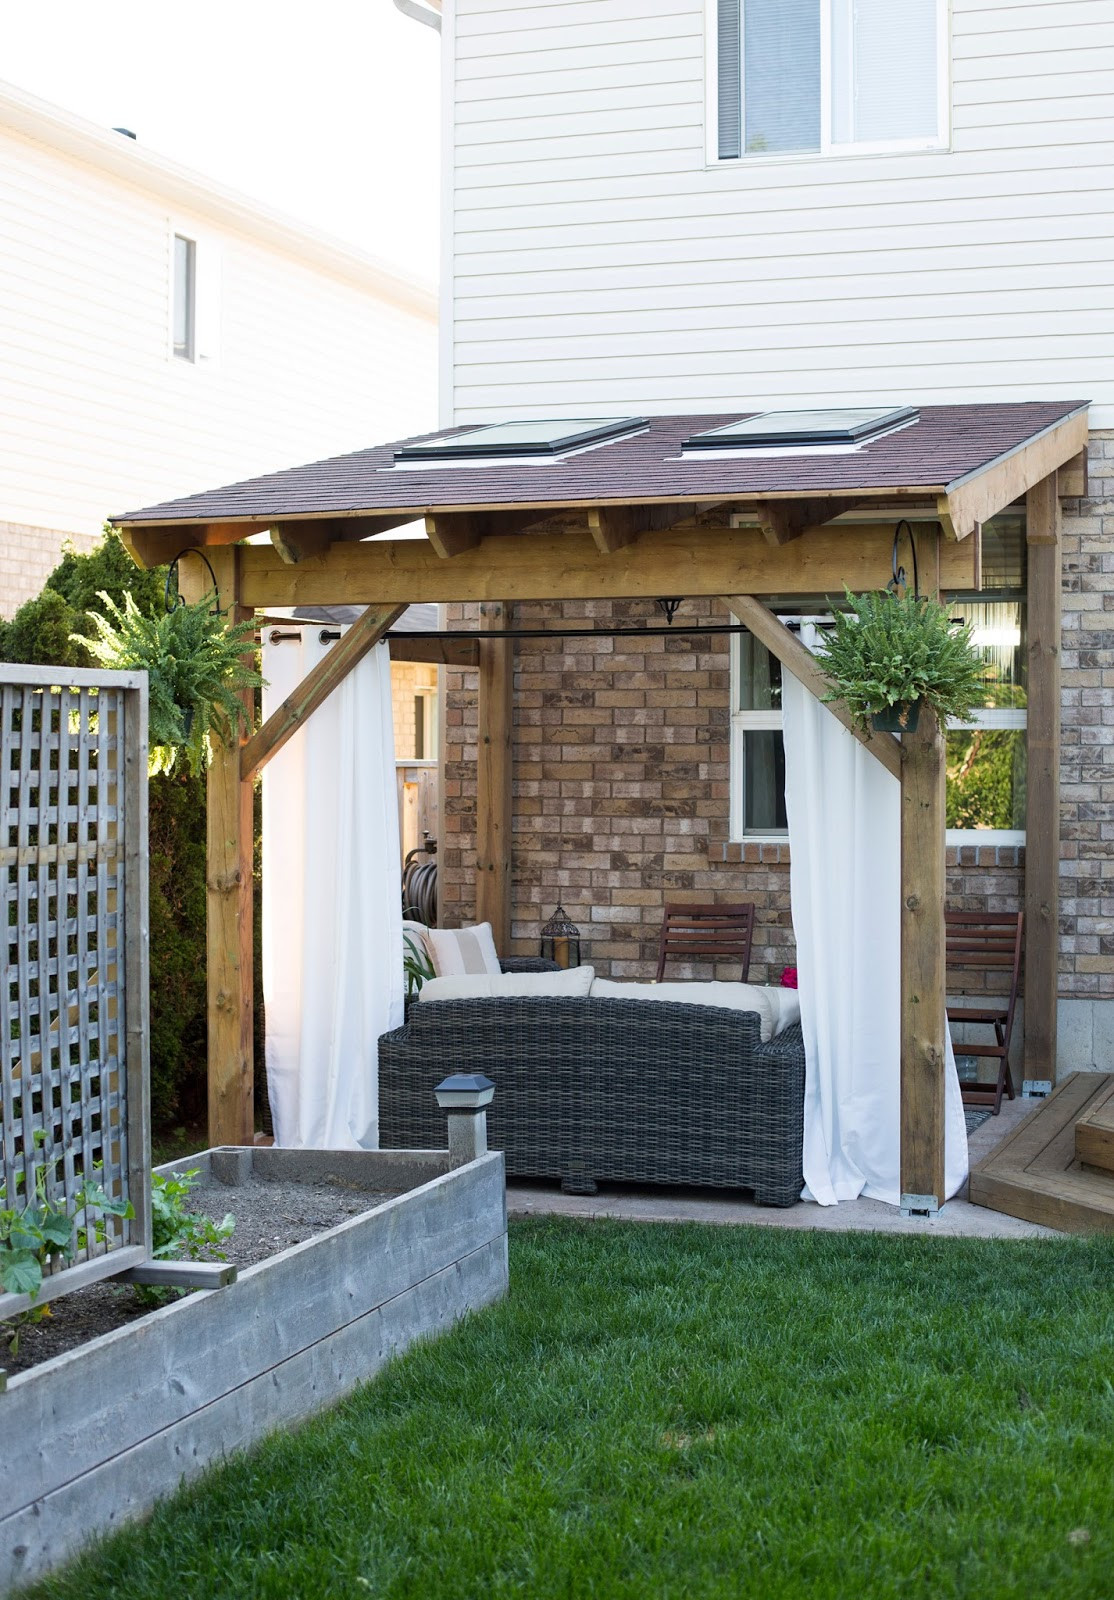 DIY Outdoor Covered Patio
 HDBlogSquad How to Build a Covered Patio • Brittany Stager